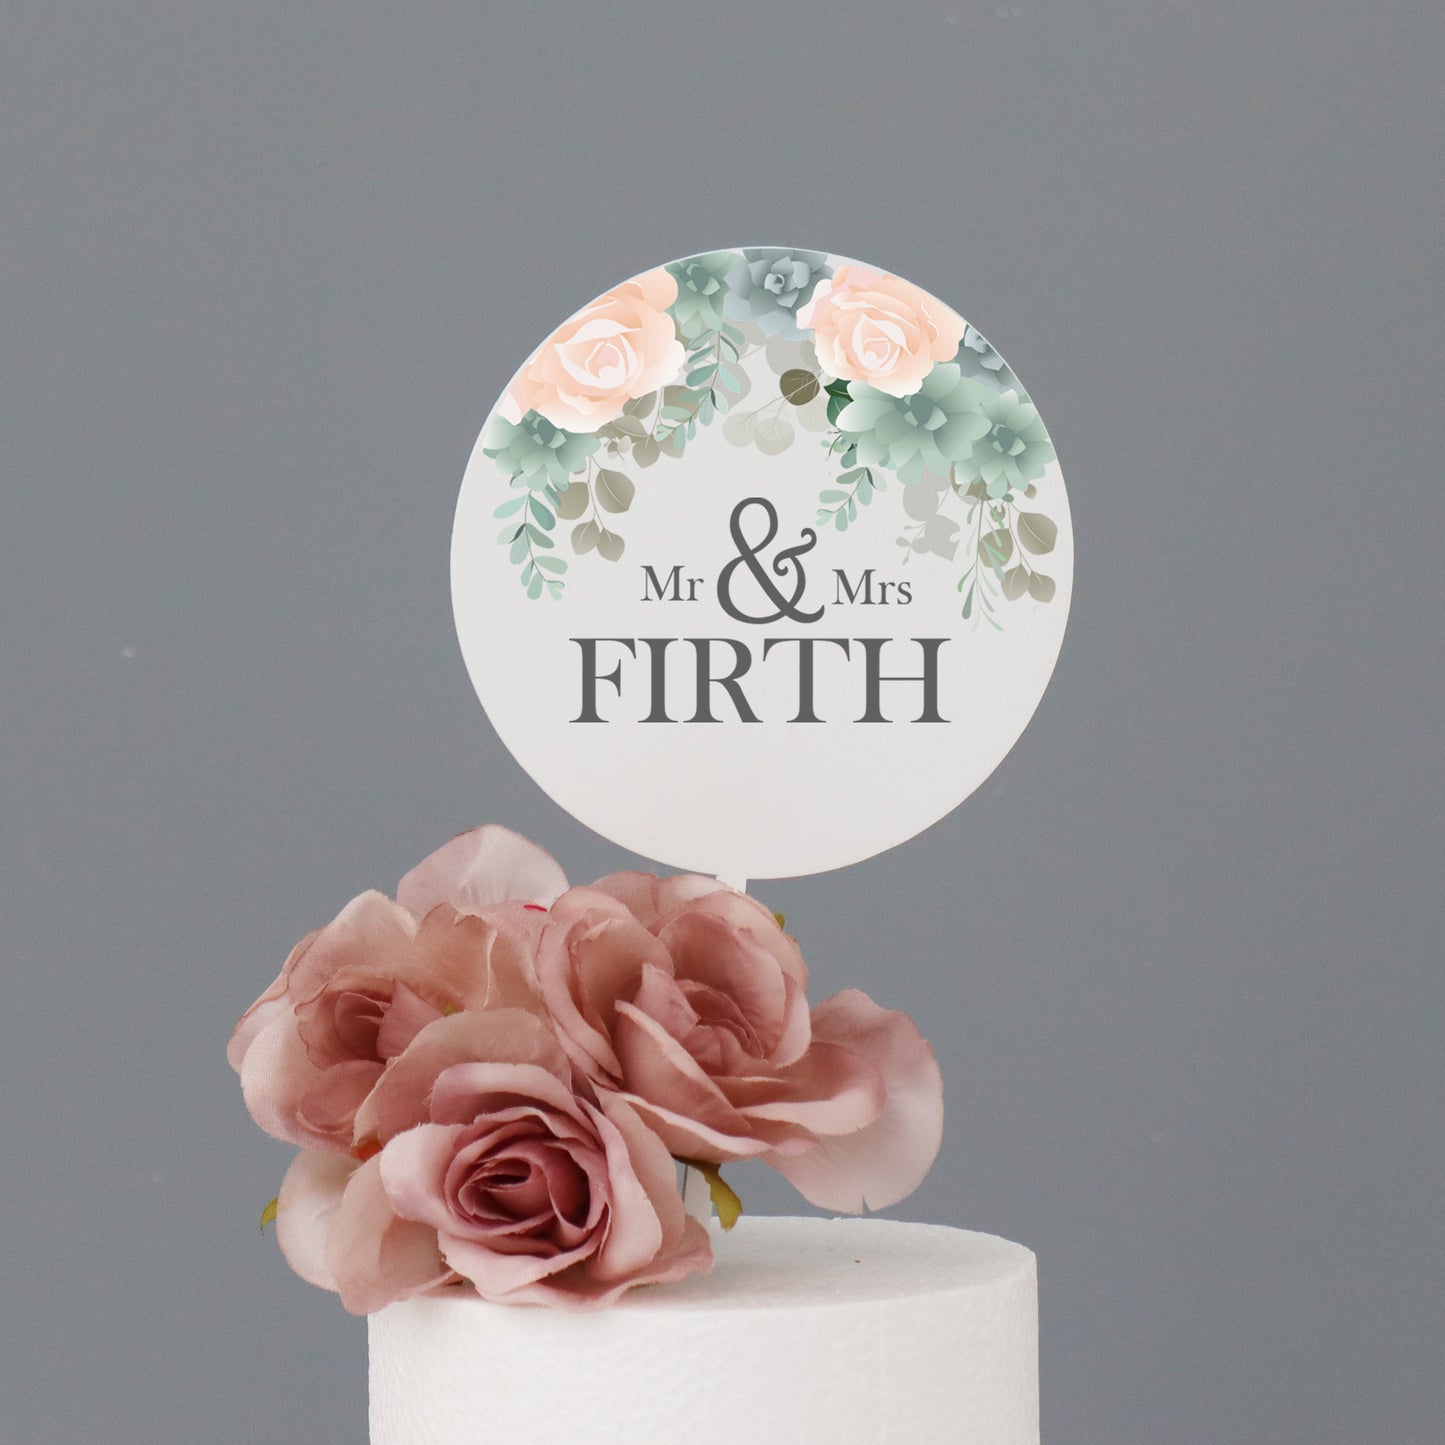 Wedding Cake Topper Blush Pink And Floral